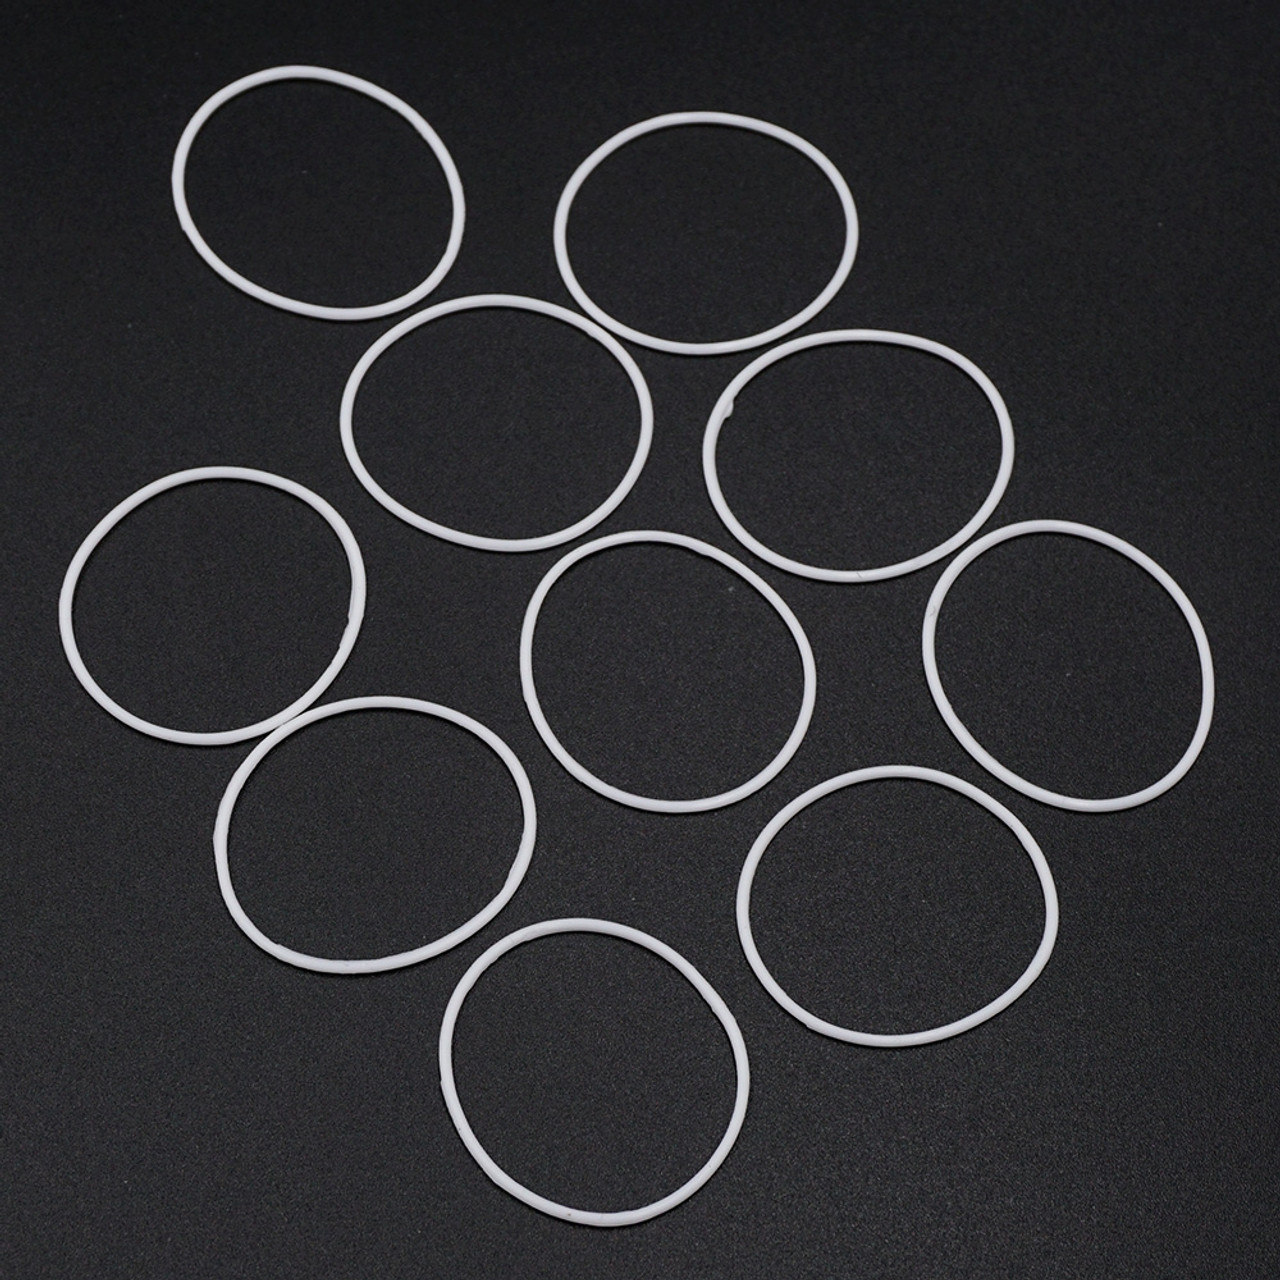 XPRESS Execute XQ1 Silicone Gear Differential O-RING 25x1mm 10pcs